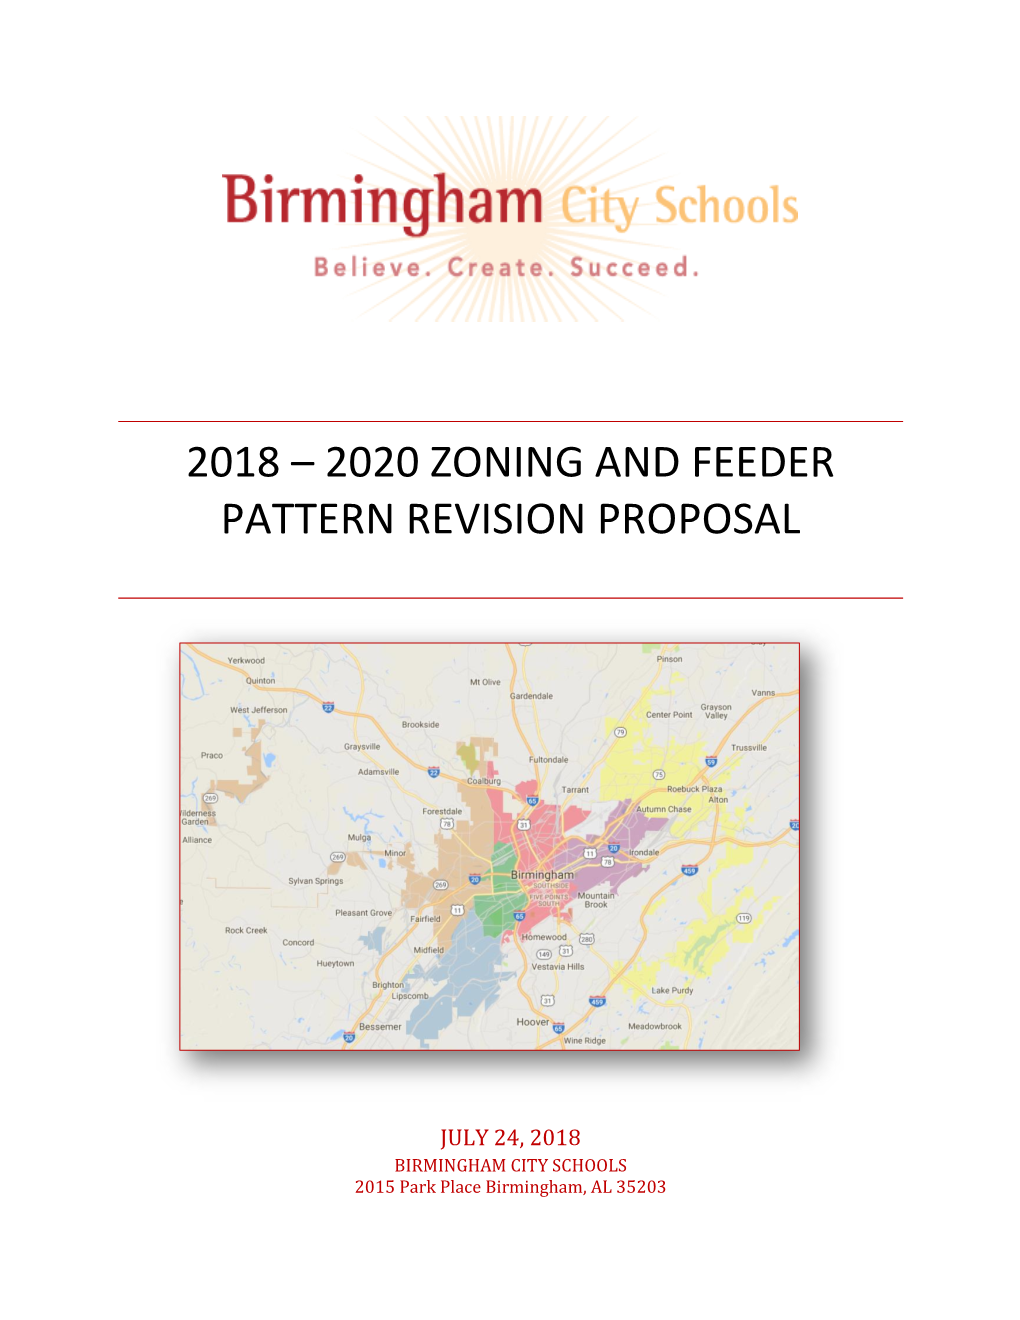 2020 Zoning and Feeder Pattern Revision Proposal